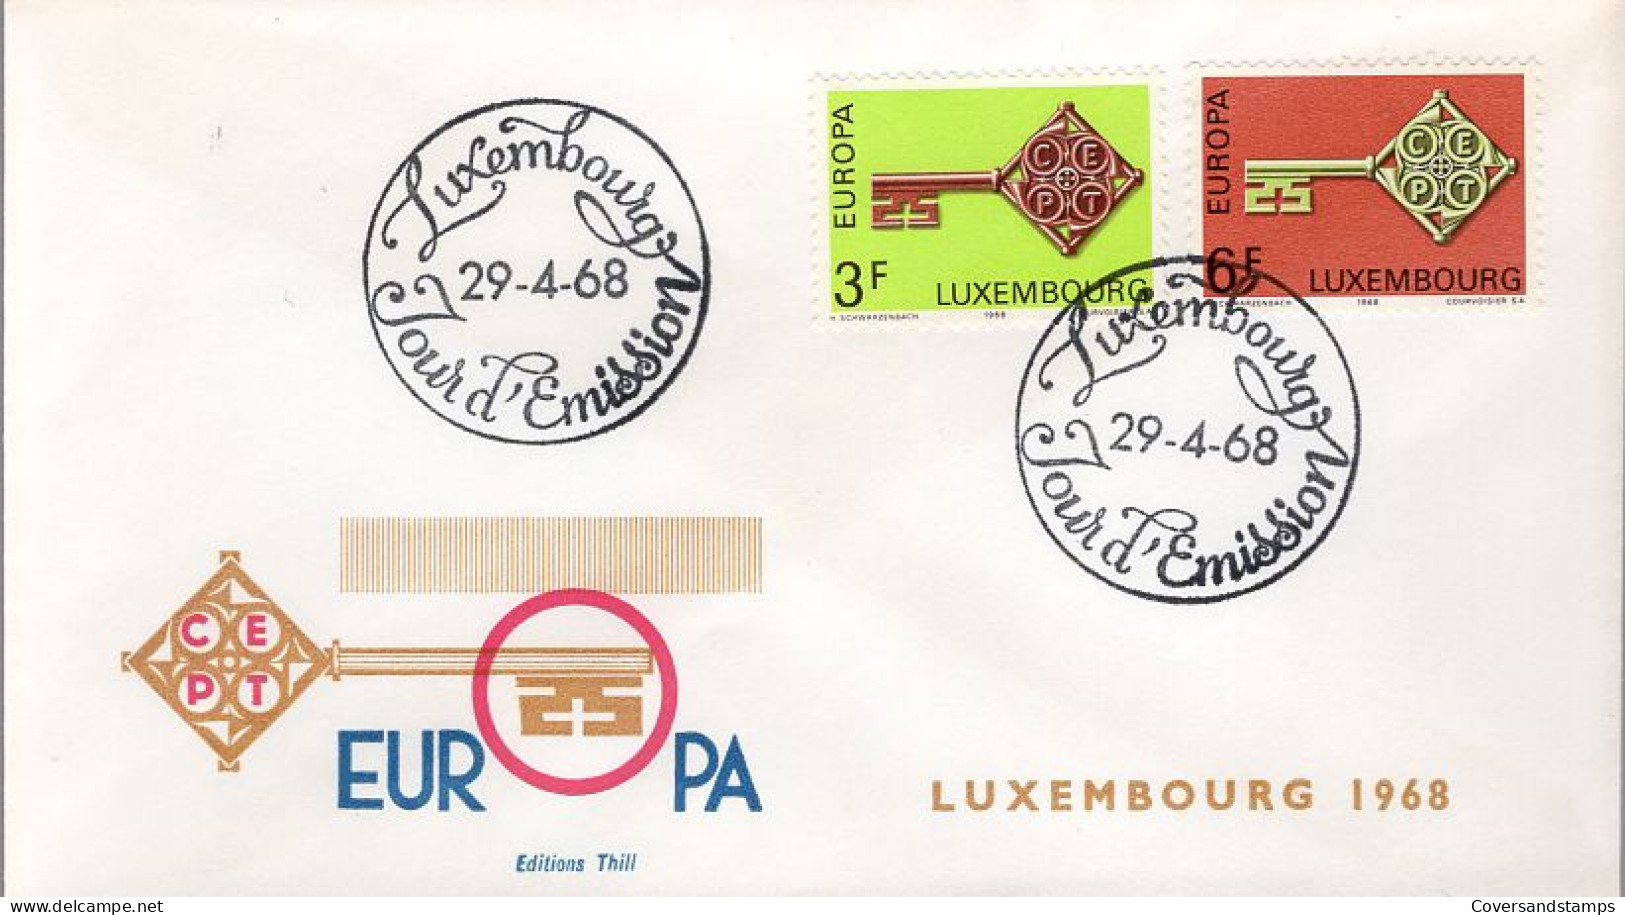  Luxembourg - FDC - Europa CEPT 1968 - 1968